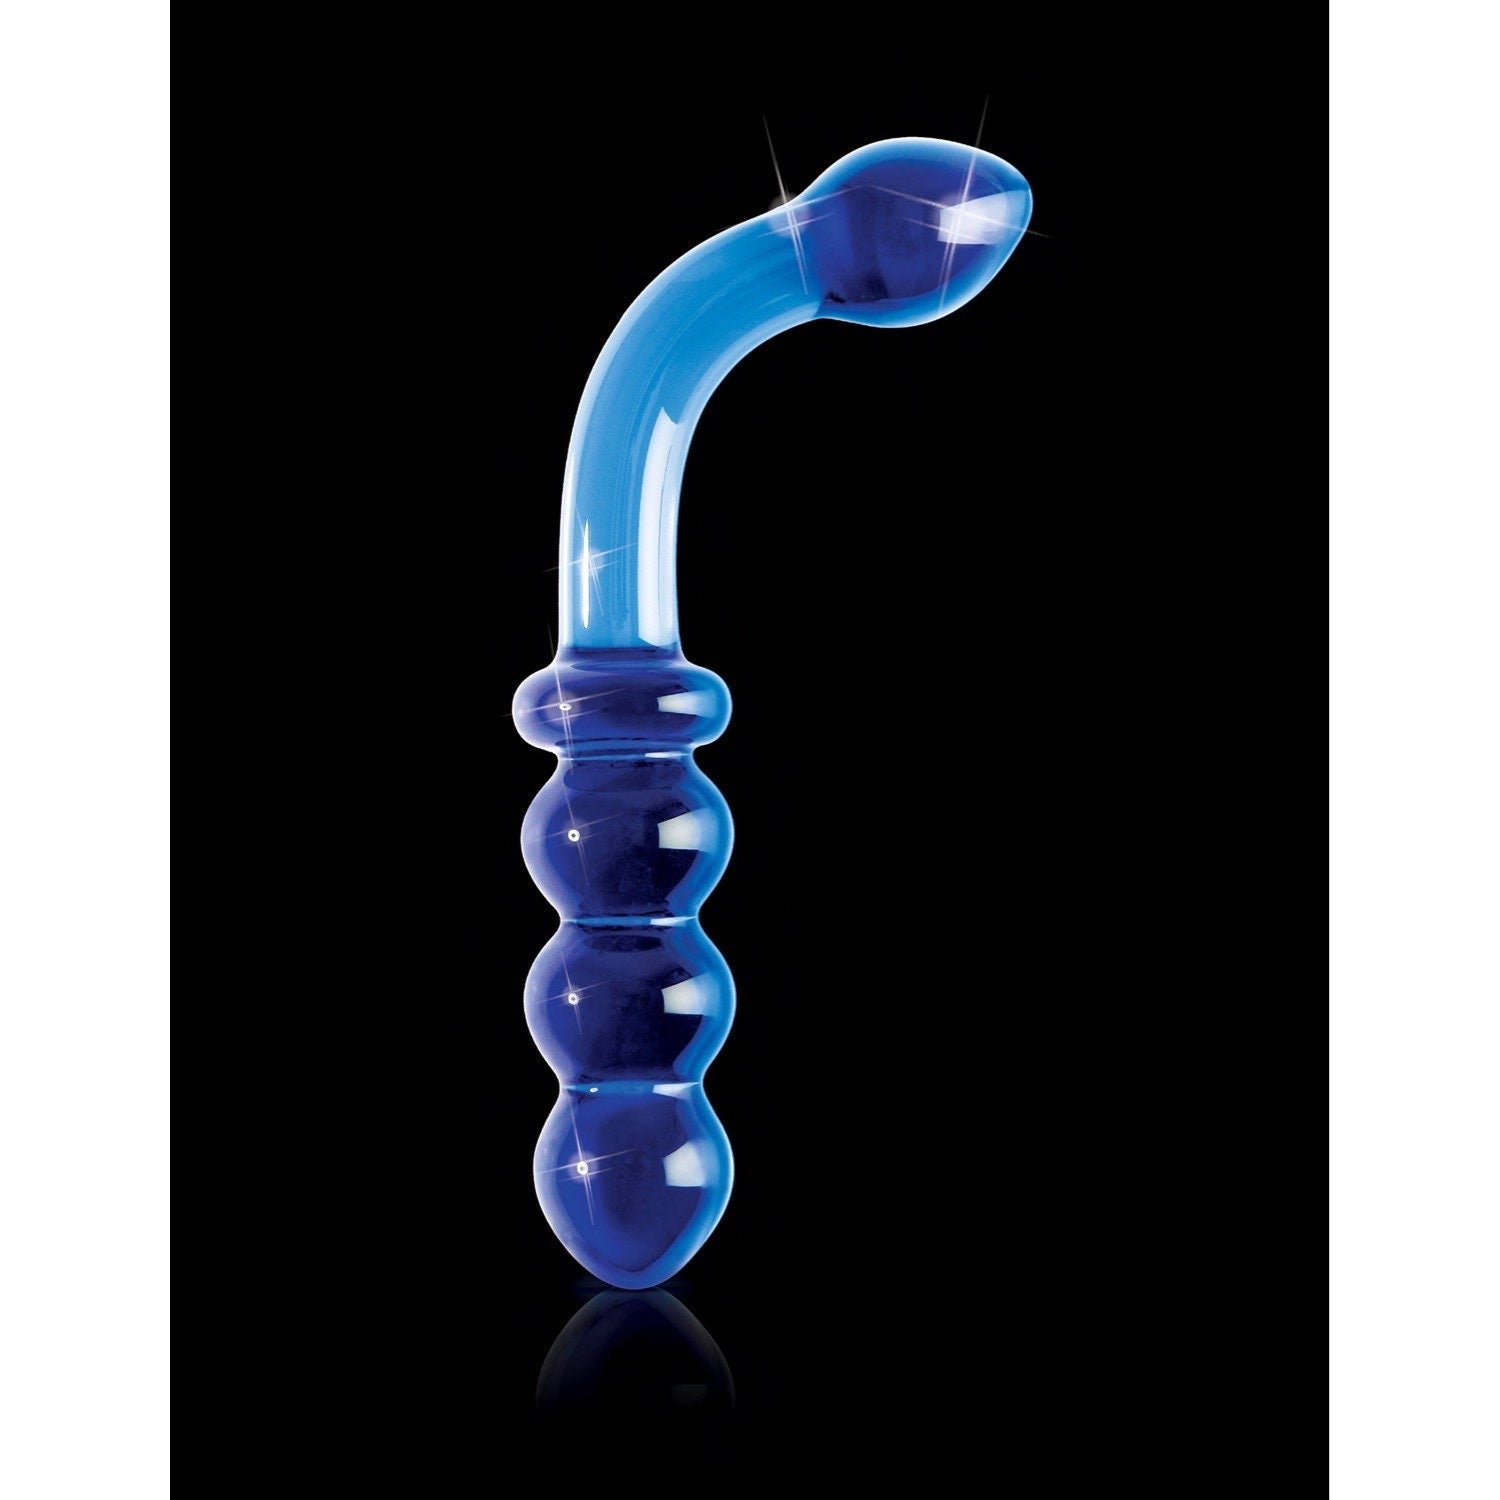 Icicles No. 31 - Blue 9.5&quot; Glass Dong by Pipedream